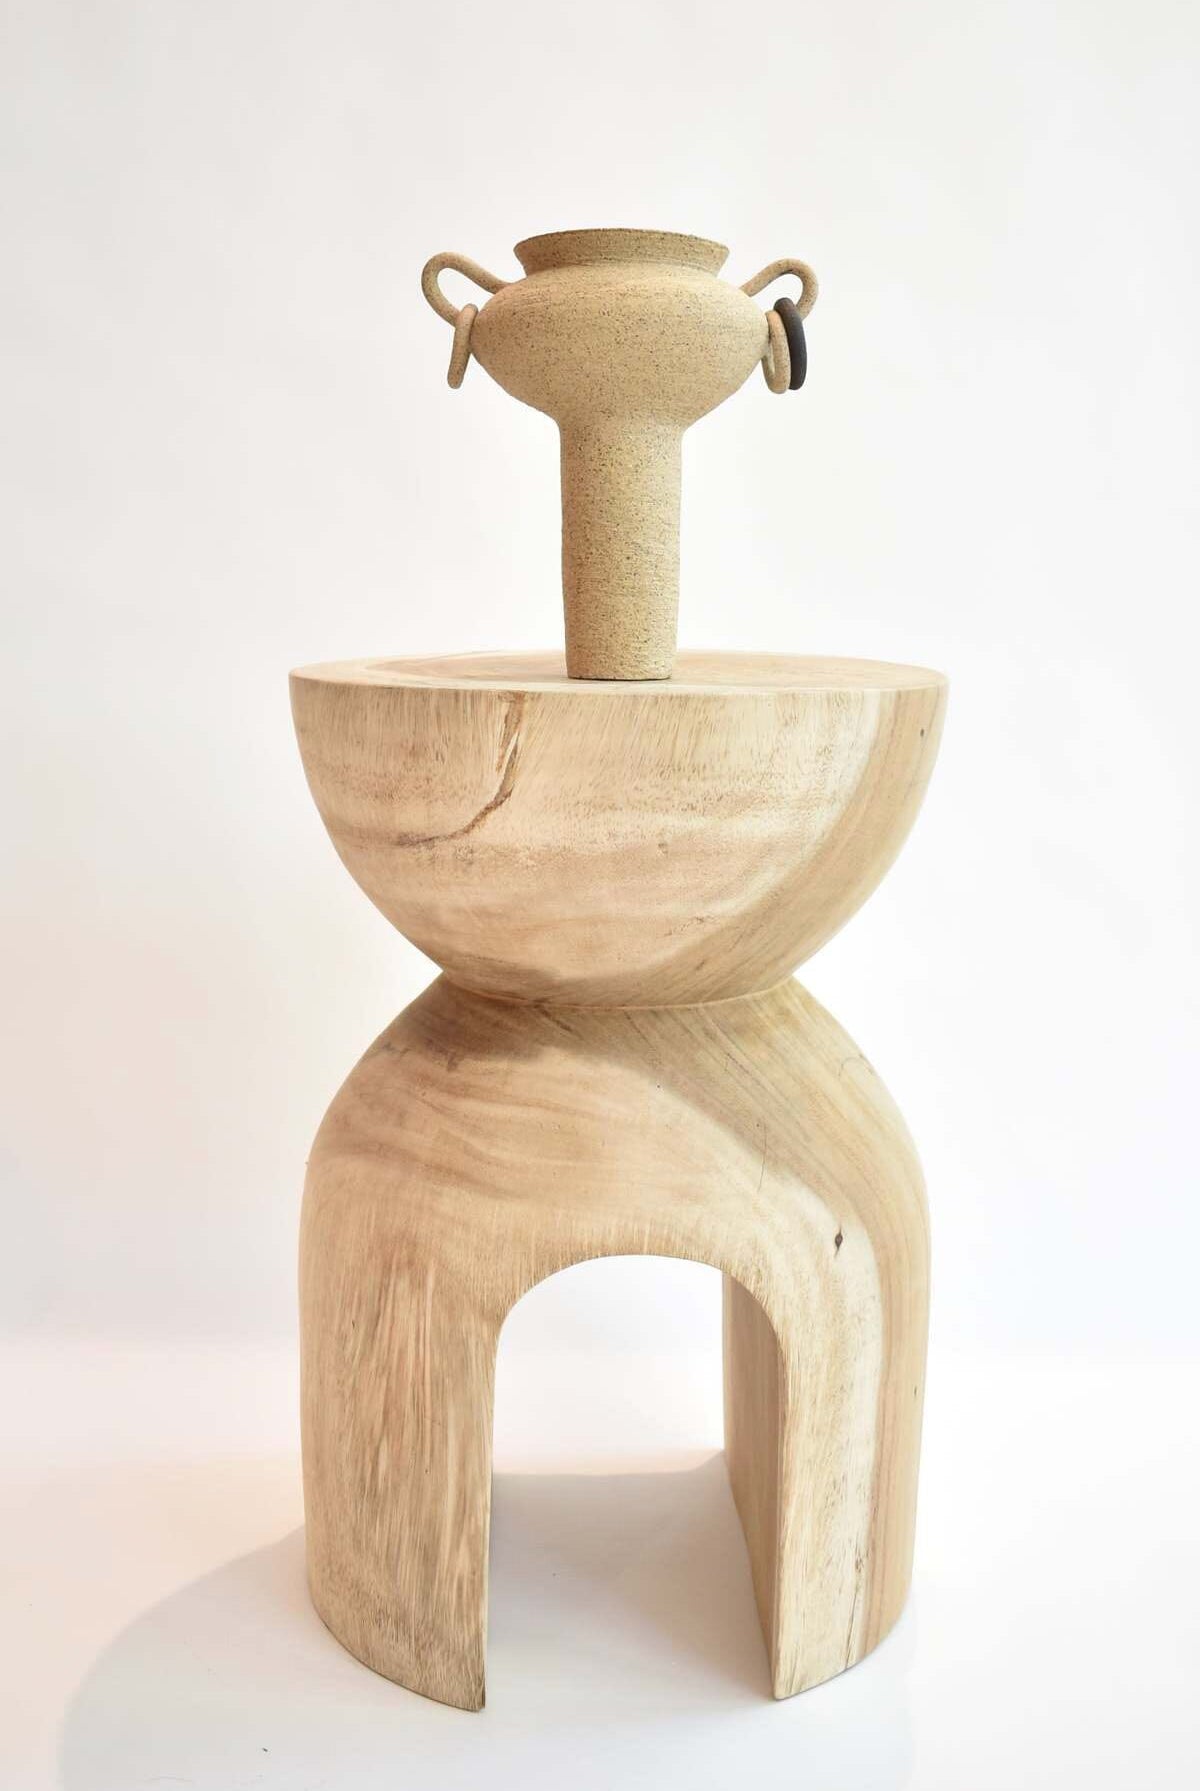 Ruby Bell Ceramics | Pedestal Vase W/Handles & Rings In Speckled Clay - SHOP YUCCA Ceramic RUBY BELL CERAMICS - YUCCA 